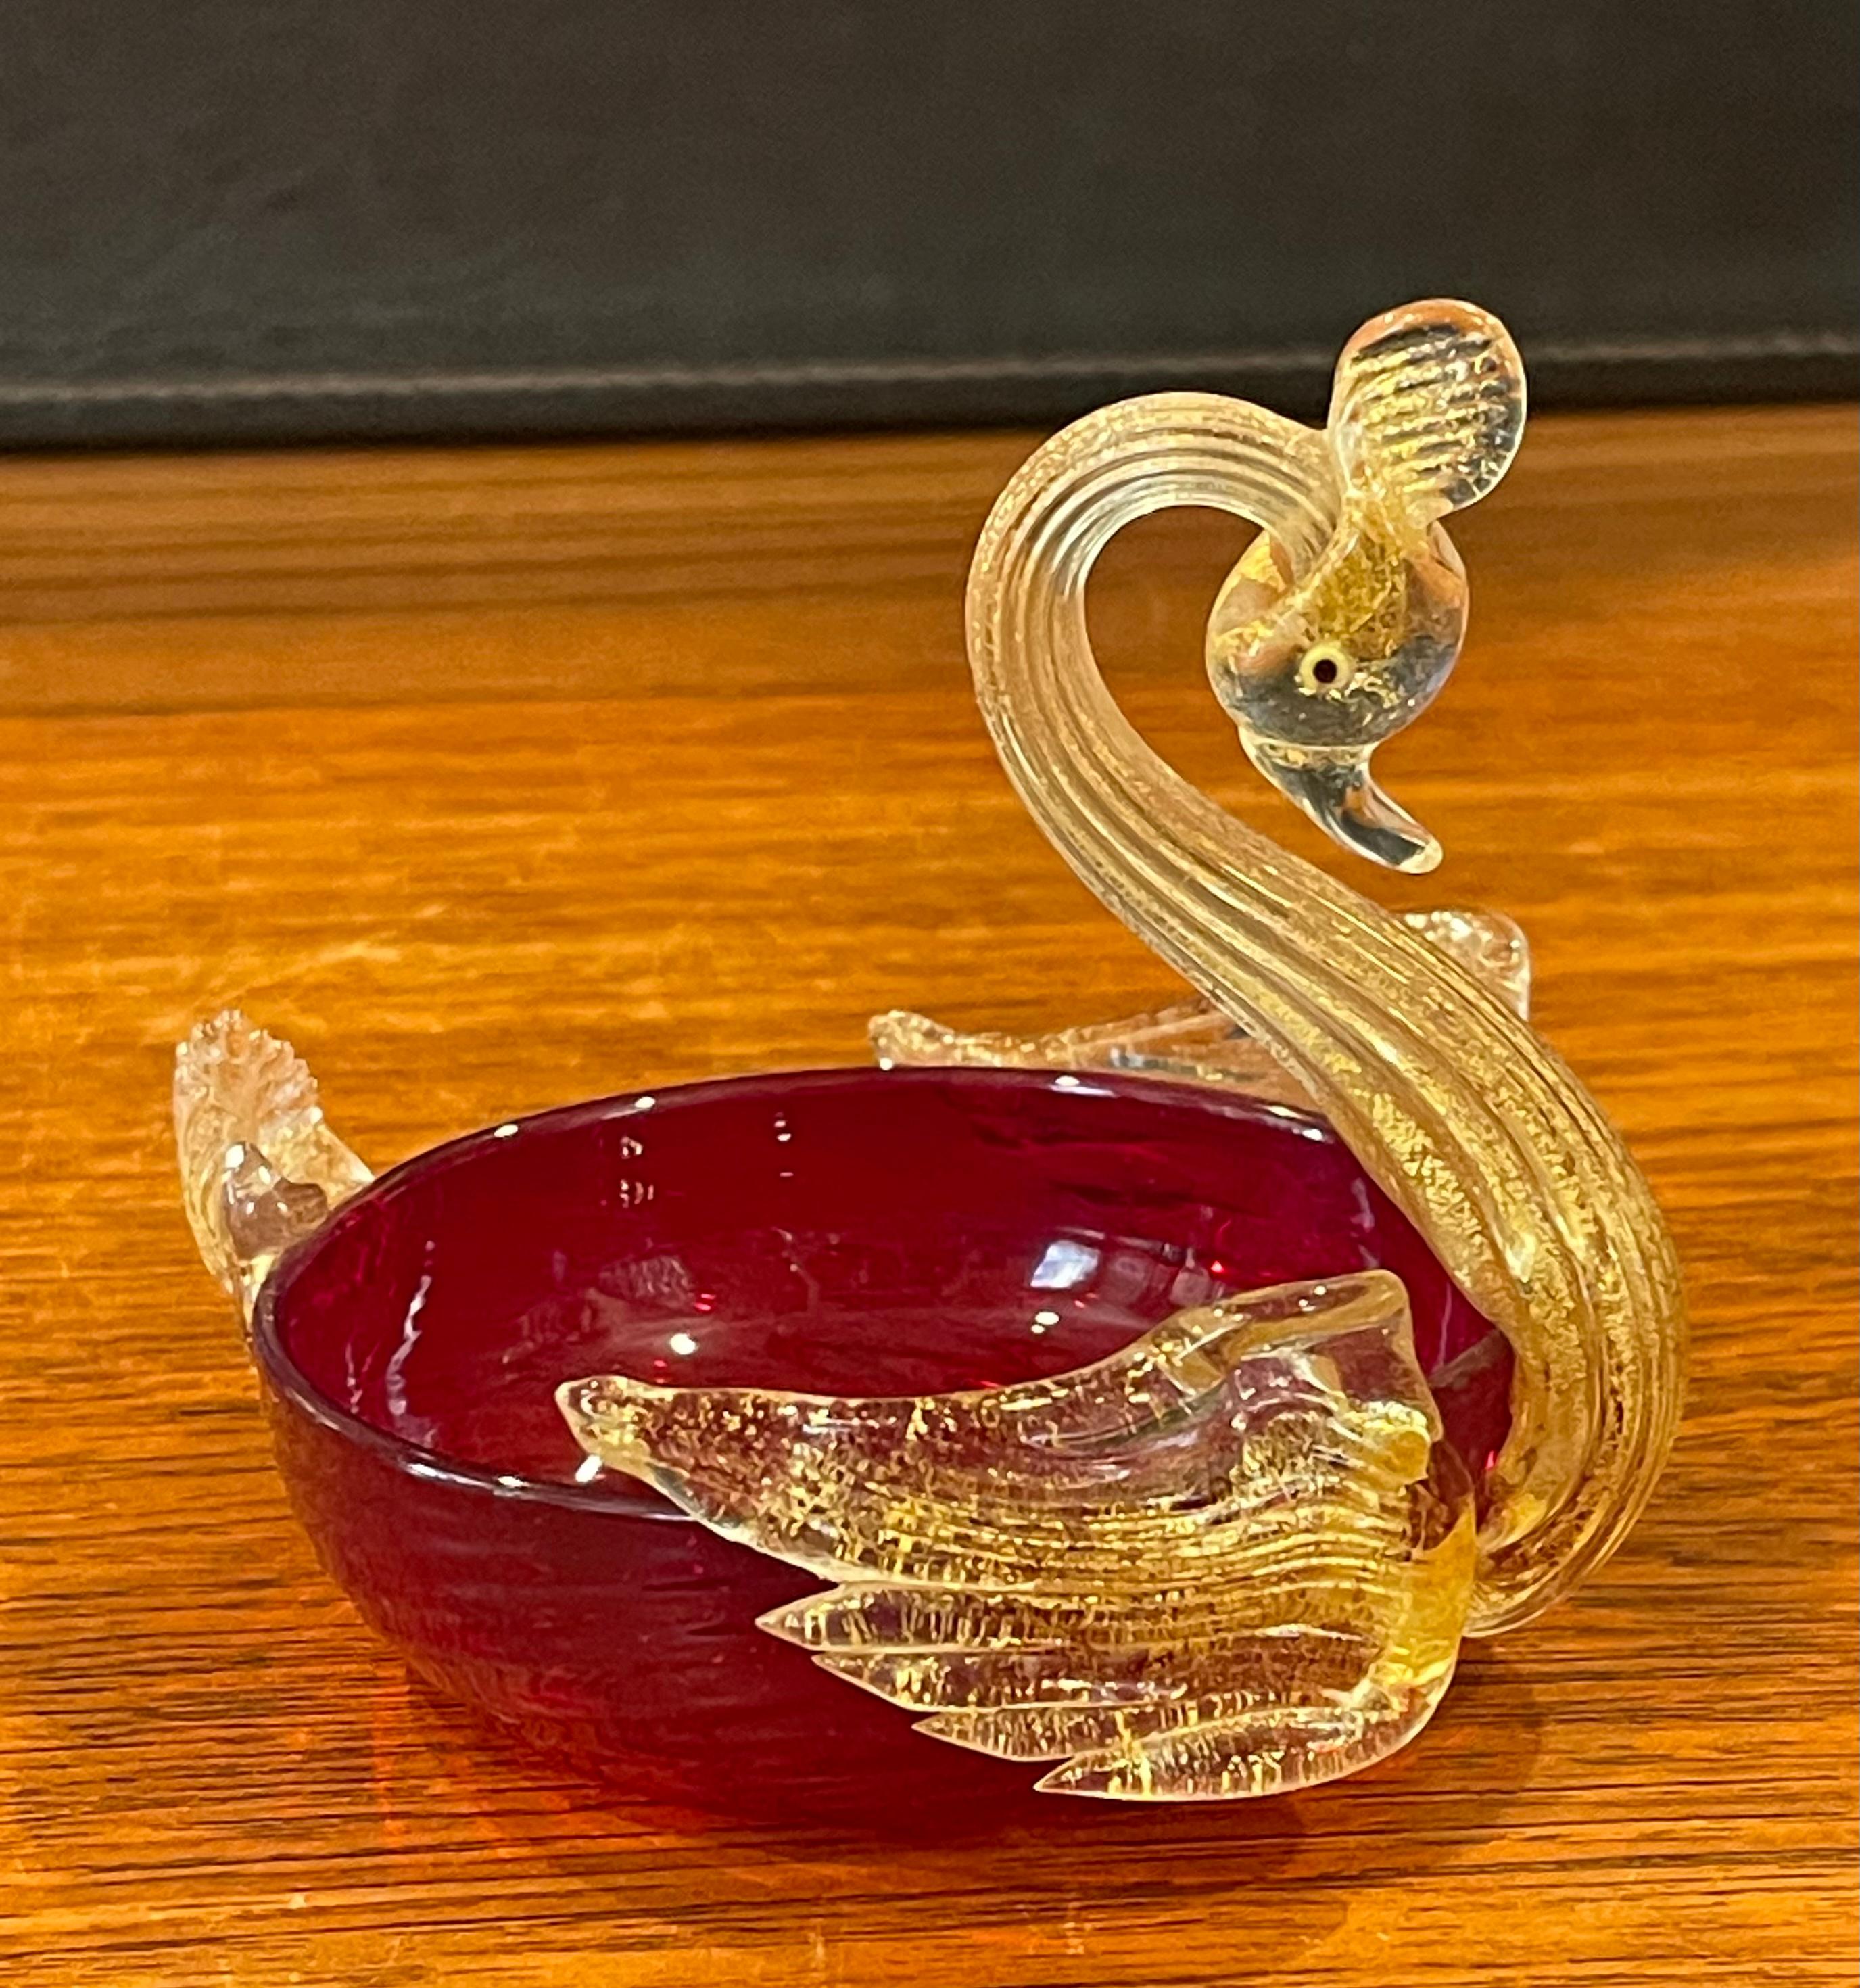 Petite Swan Art Glass Sculpture by Murano Glass In Good Condition For Sale In San Diego, CA